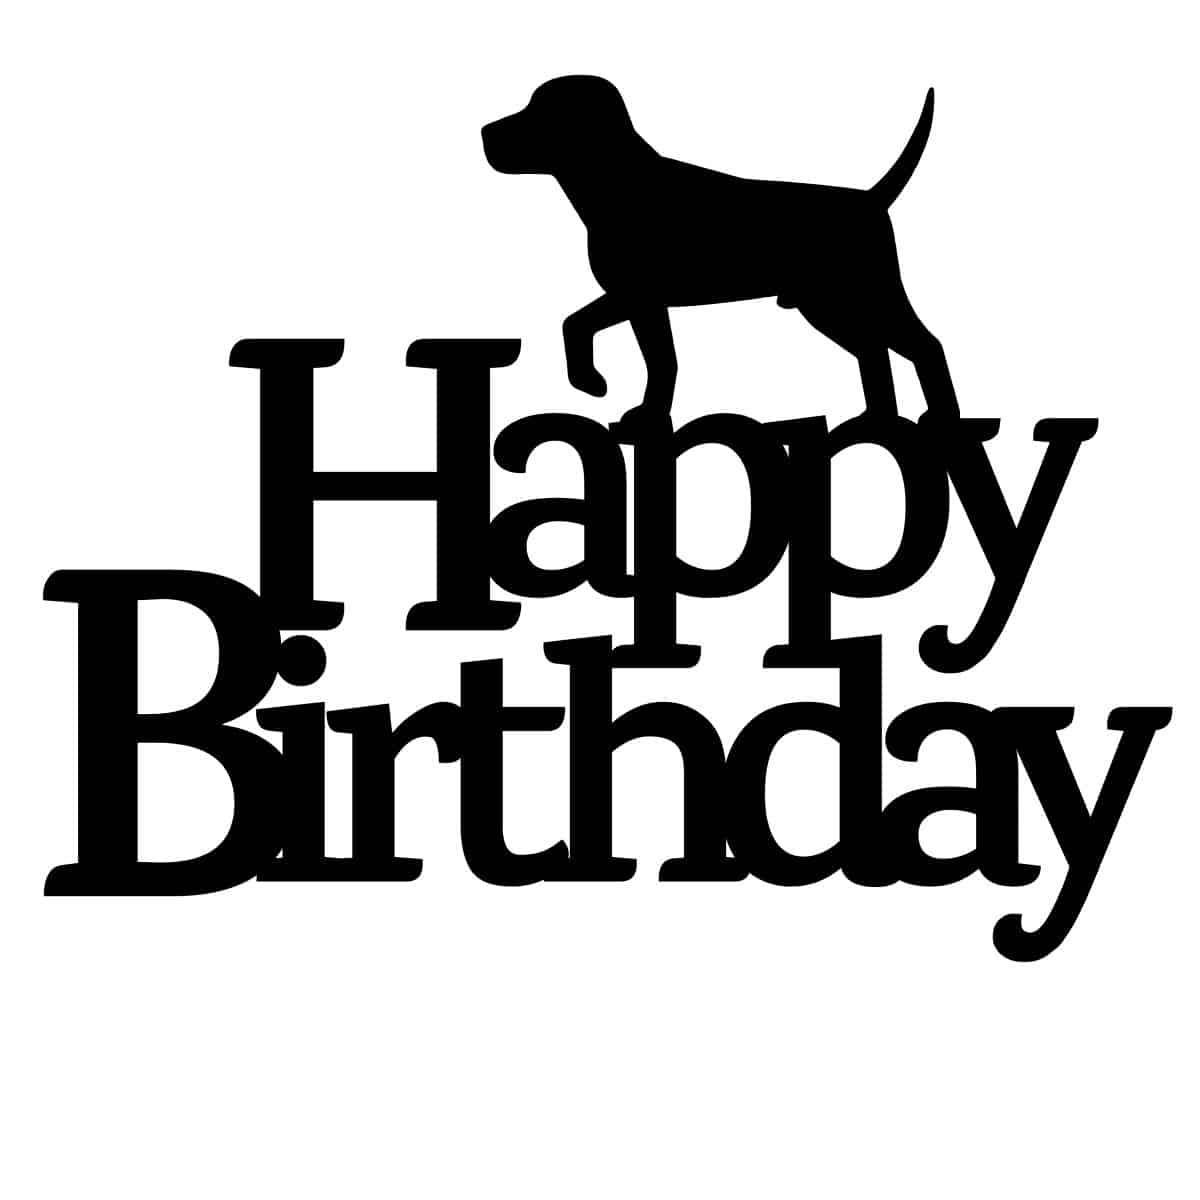 A happy birthday free topper design with a dog on top.